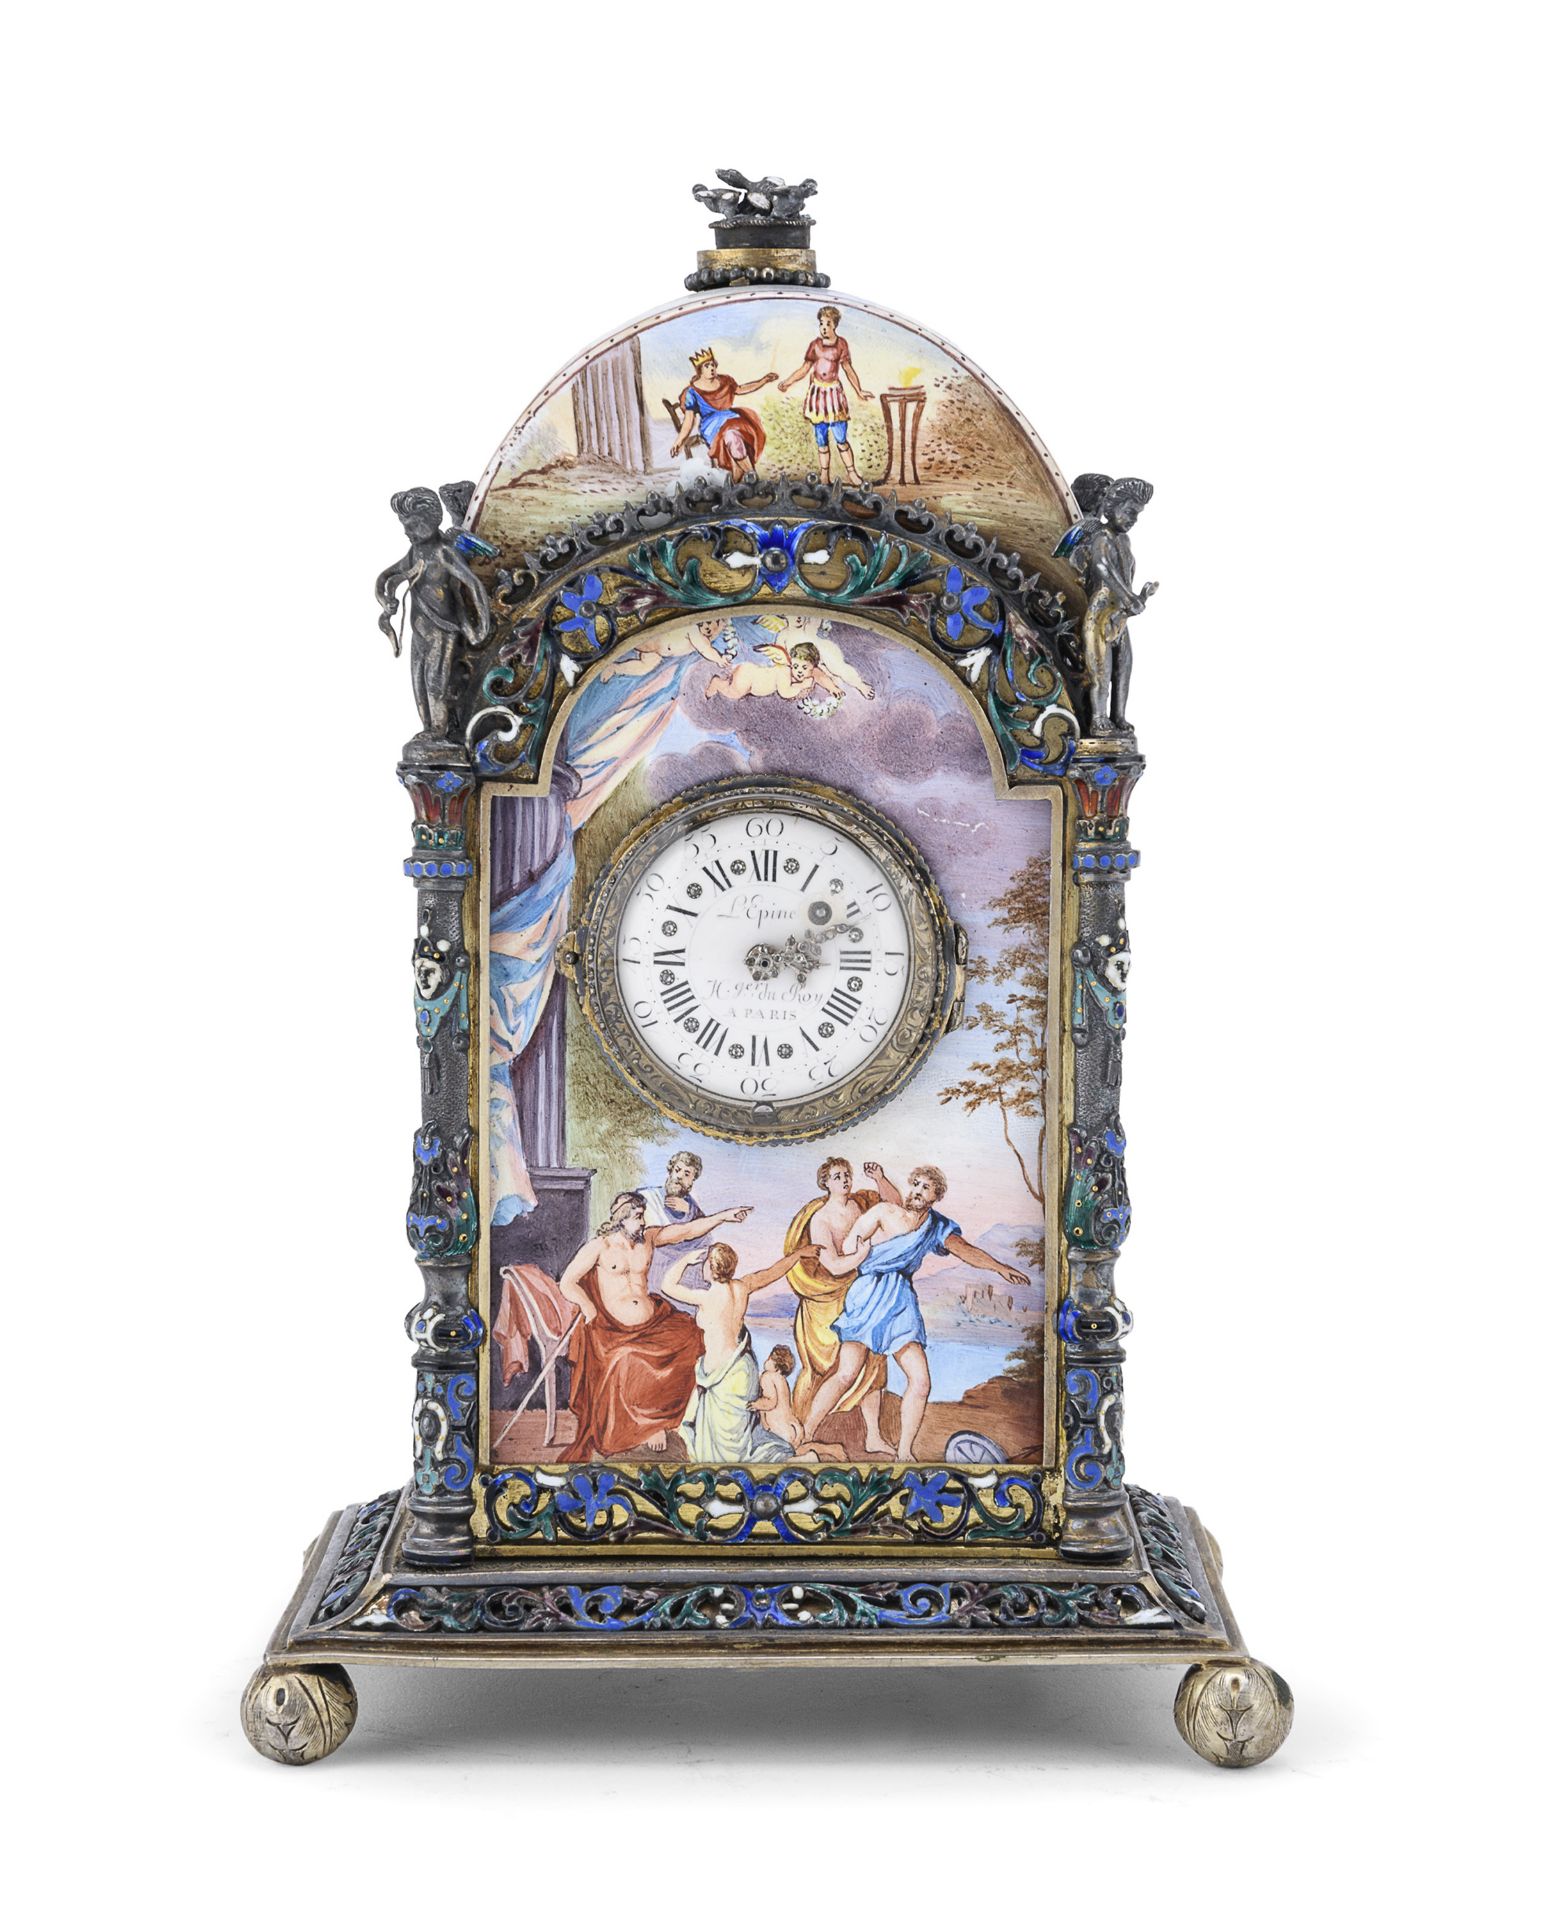 METAL AND ENAMEL CLOCK FRANCE SIGNED LEPINE LATE 18TH CENTURY